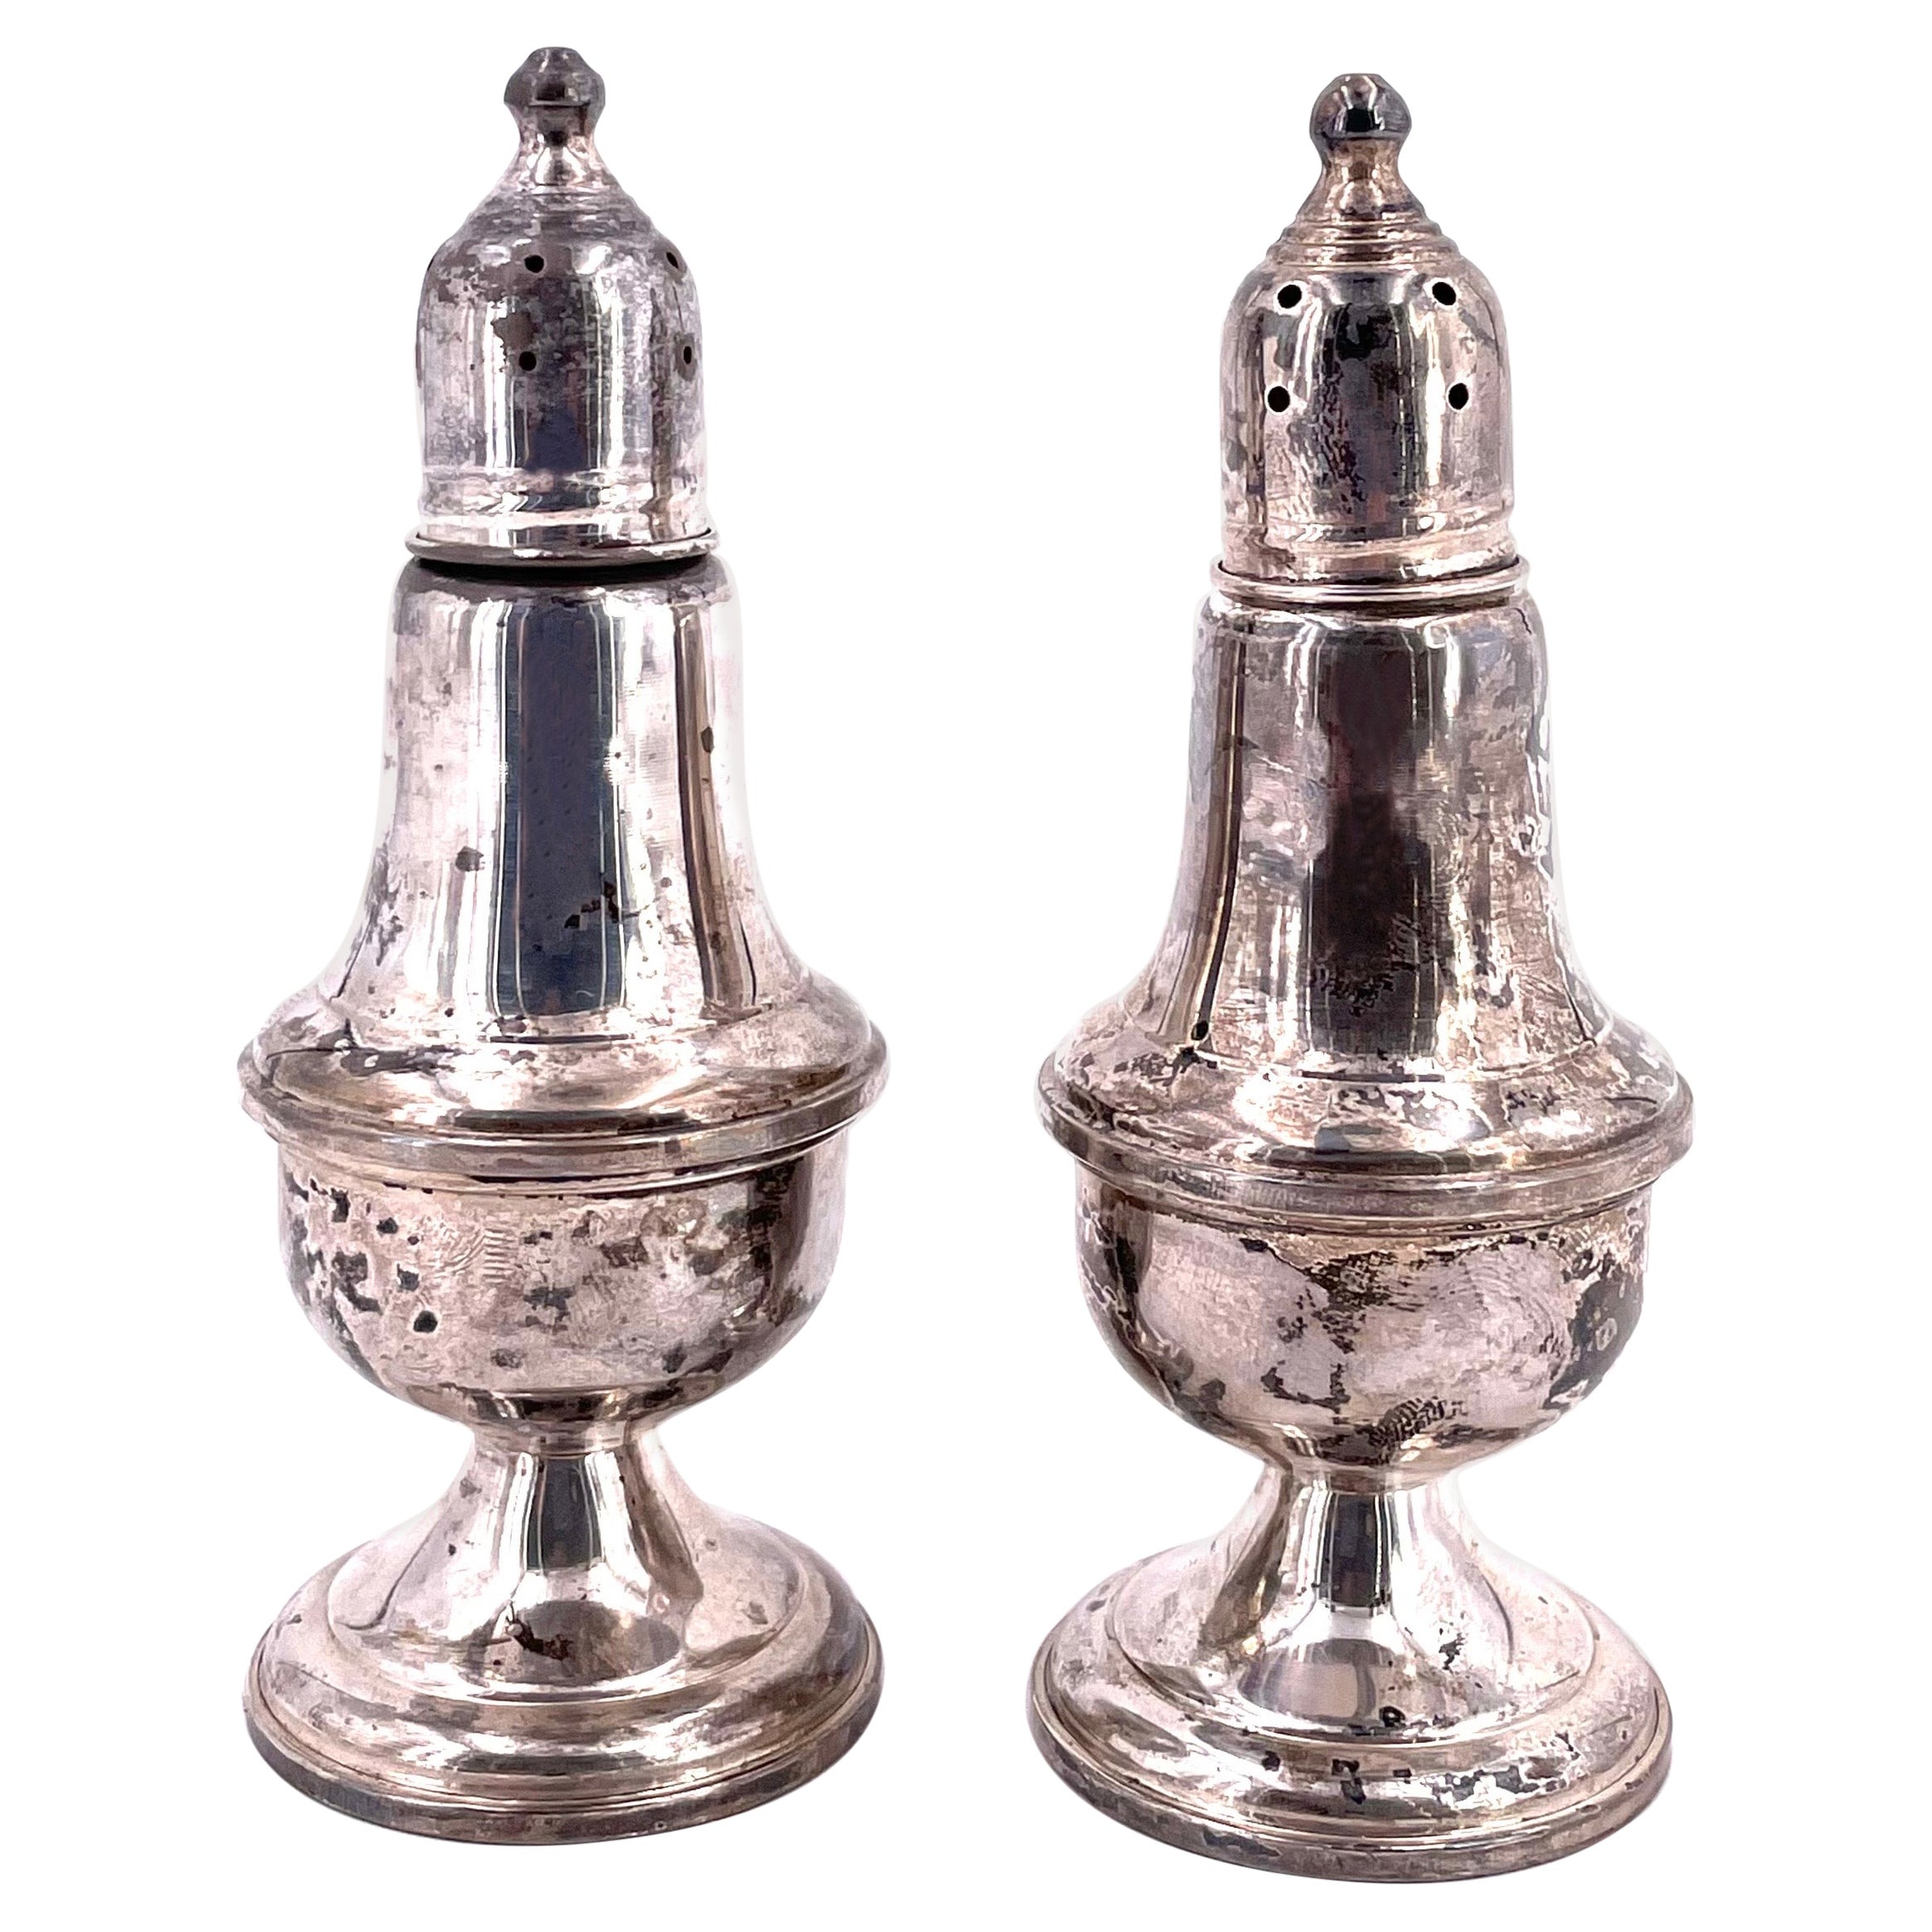 Pair of Sterling Silver Salt and Pepper Shakers by Empire